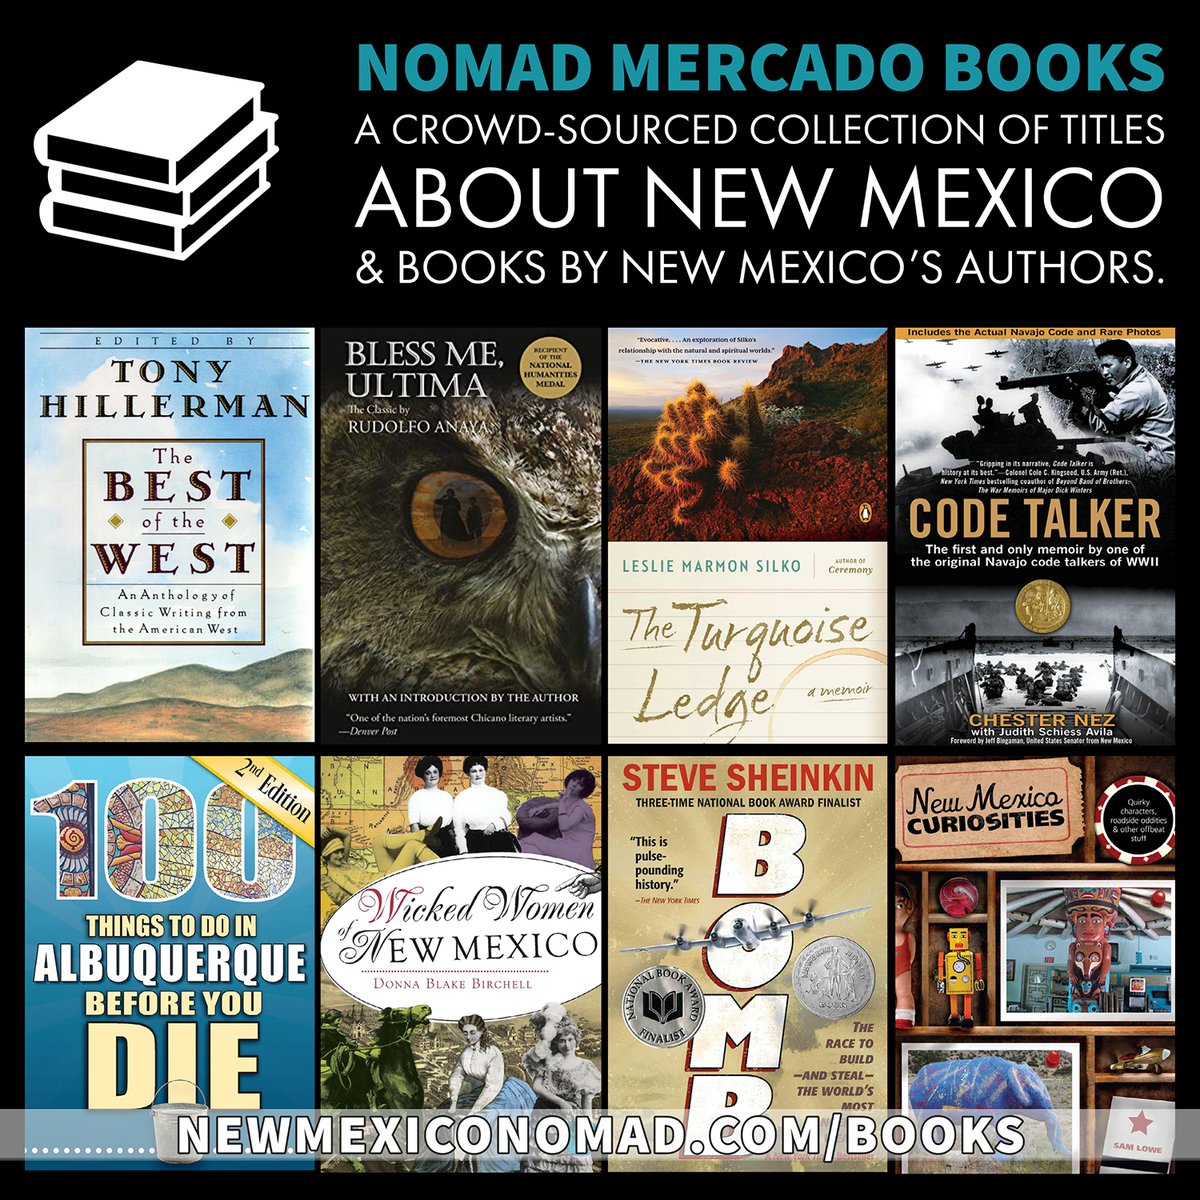 #Books About #New Mexico and/or by New Mexicans - ow.ly/MOXR50QbjE8

#authors #localauthors #fiction #nonfiction #history #lovetoread #booklover #bibliophile #bookdragon #bookworm #iamreading #greatreads